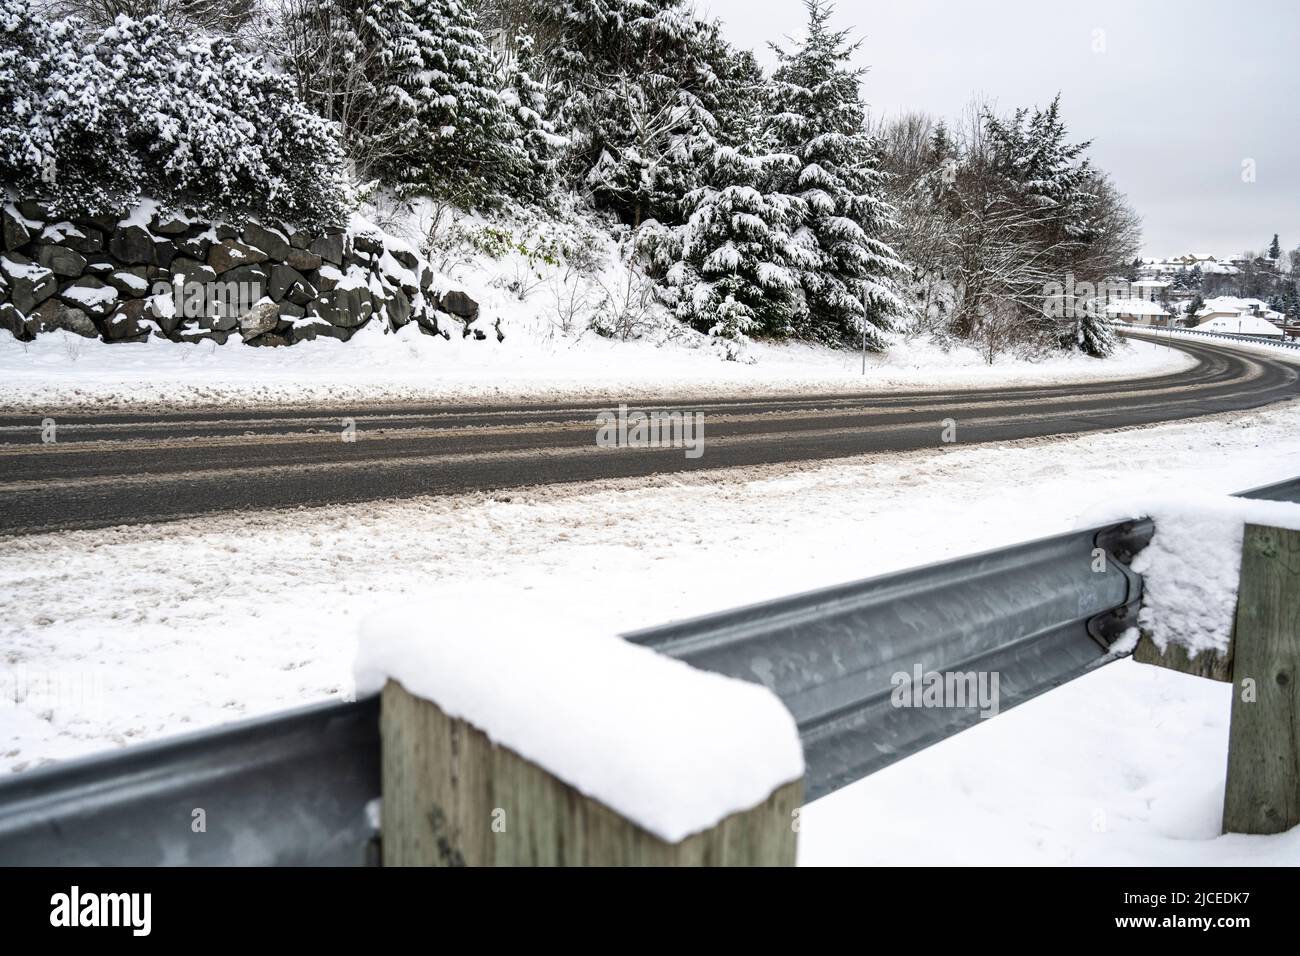 highway under snow conditions with a guard rail Stock Photo